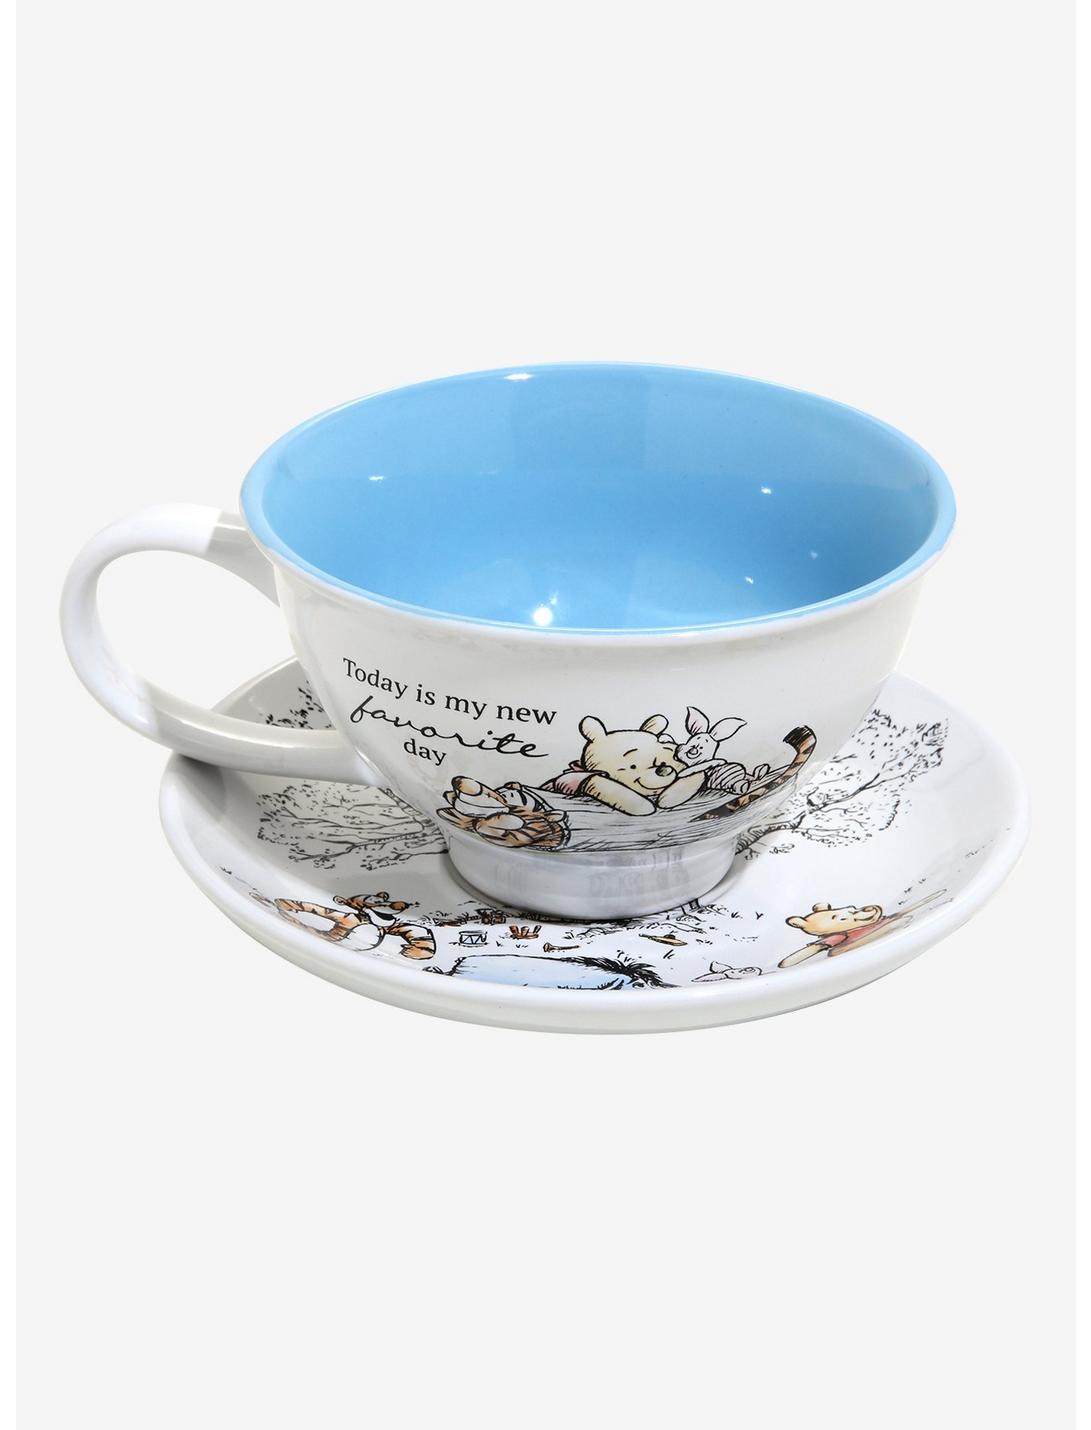 Disney Winnie the Pooh Favorite Day Teacup with Saucer, , hi-res